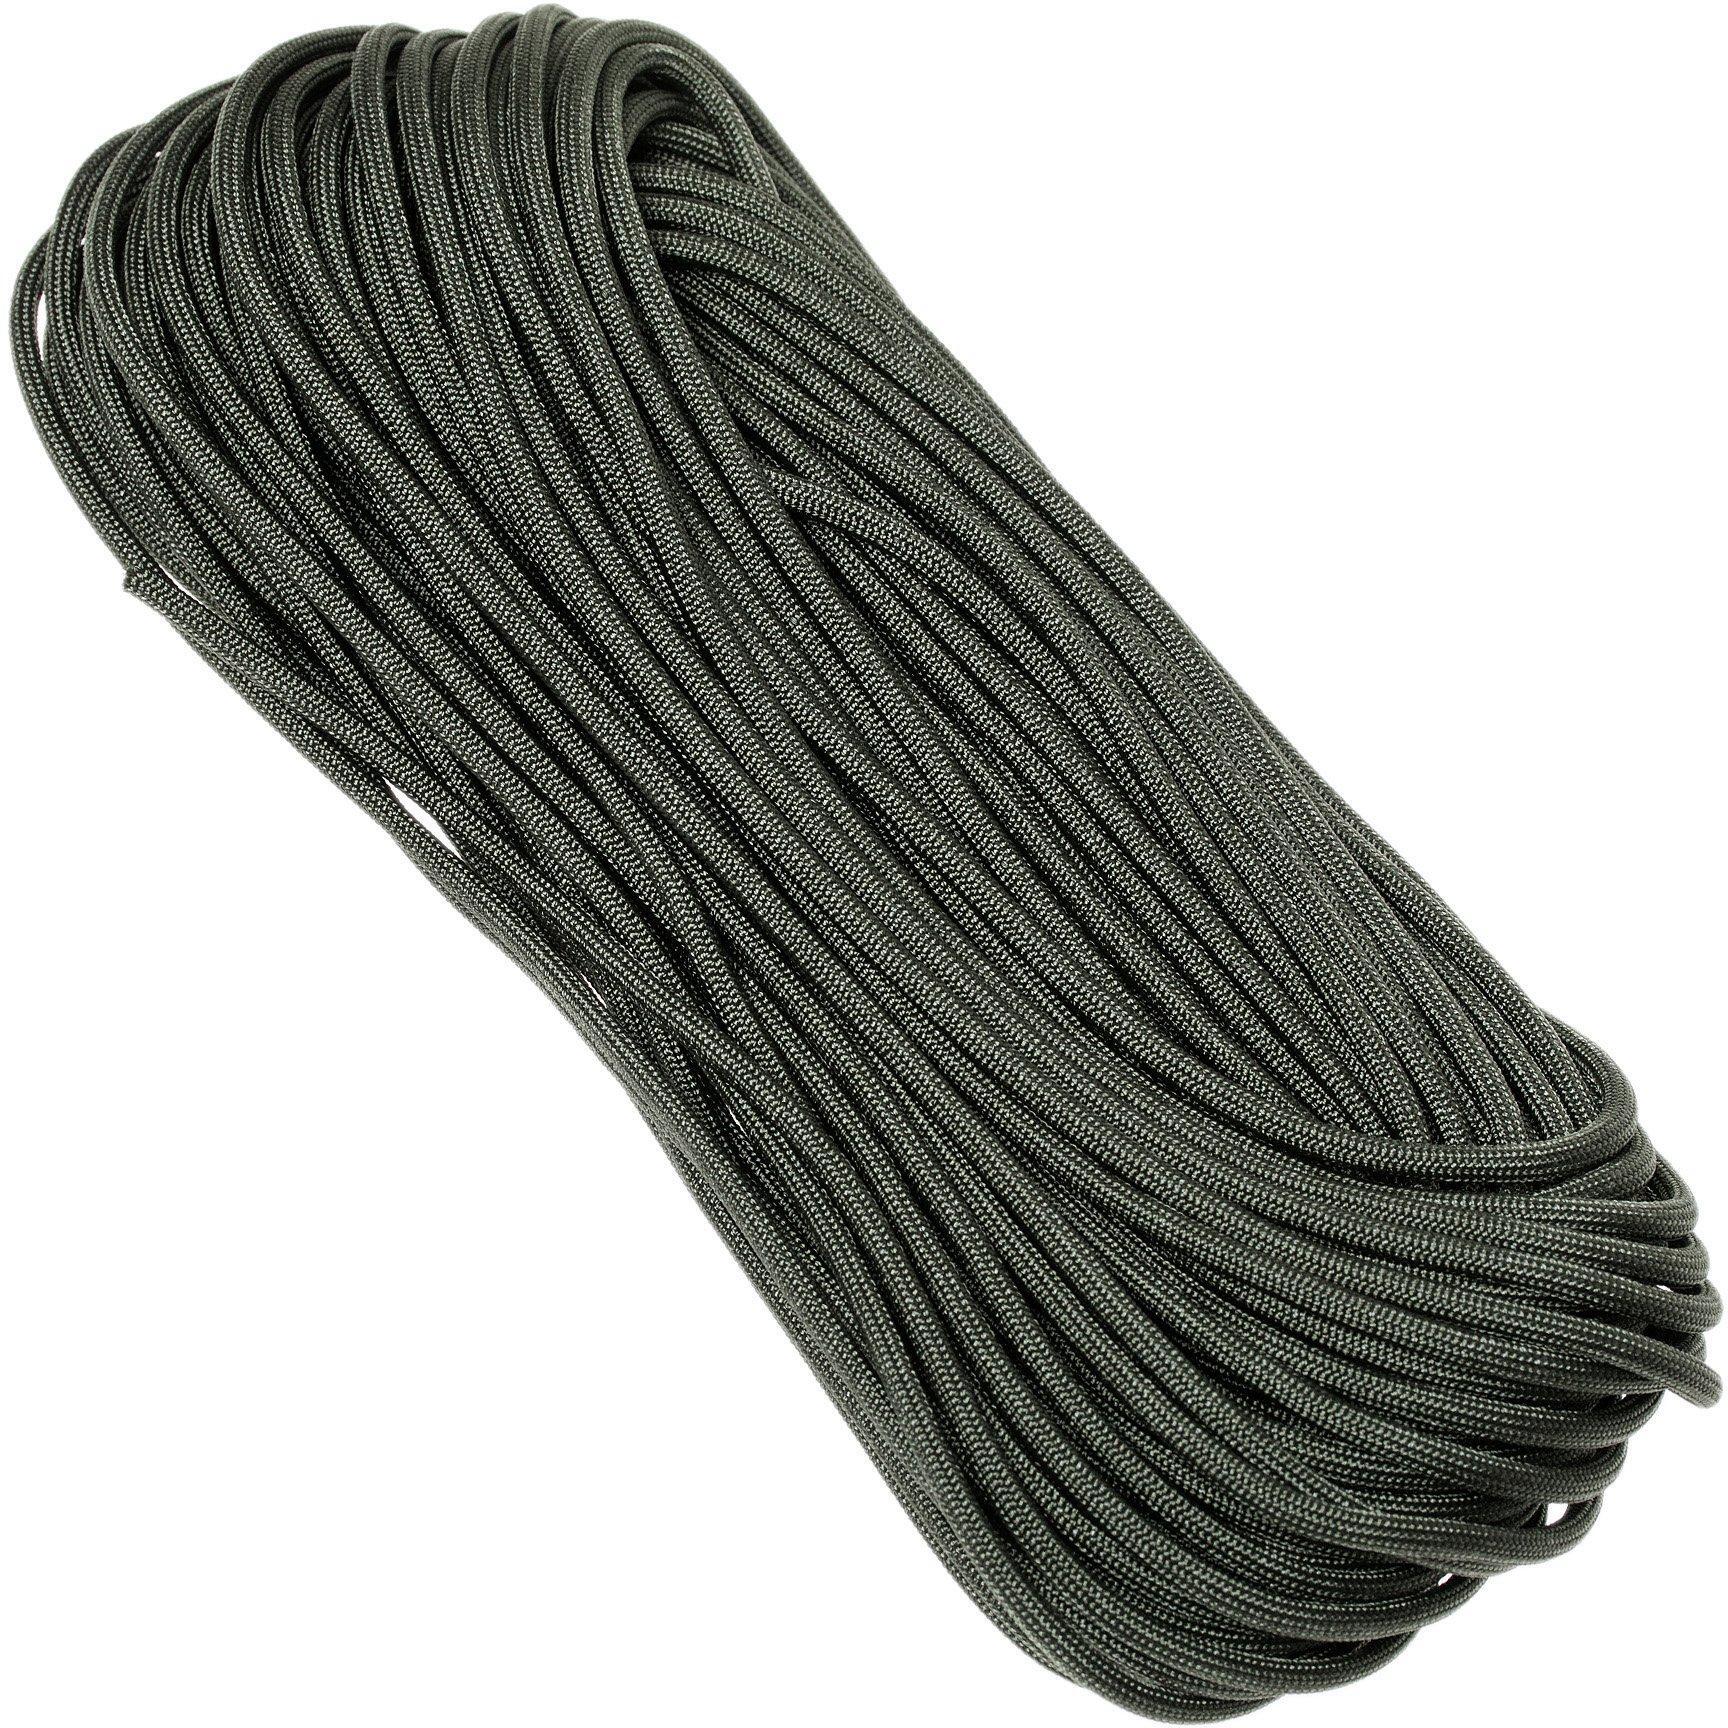 Paracord Knivesandtools 550 Paracord Type III Military Spec RG1167H, foliage, 100 ft (30,48 m)